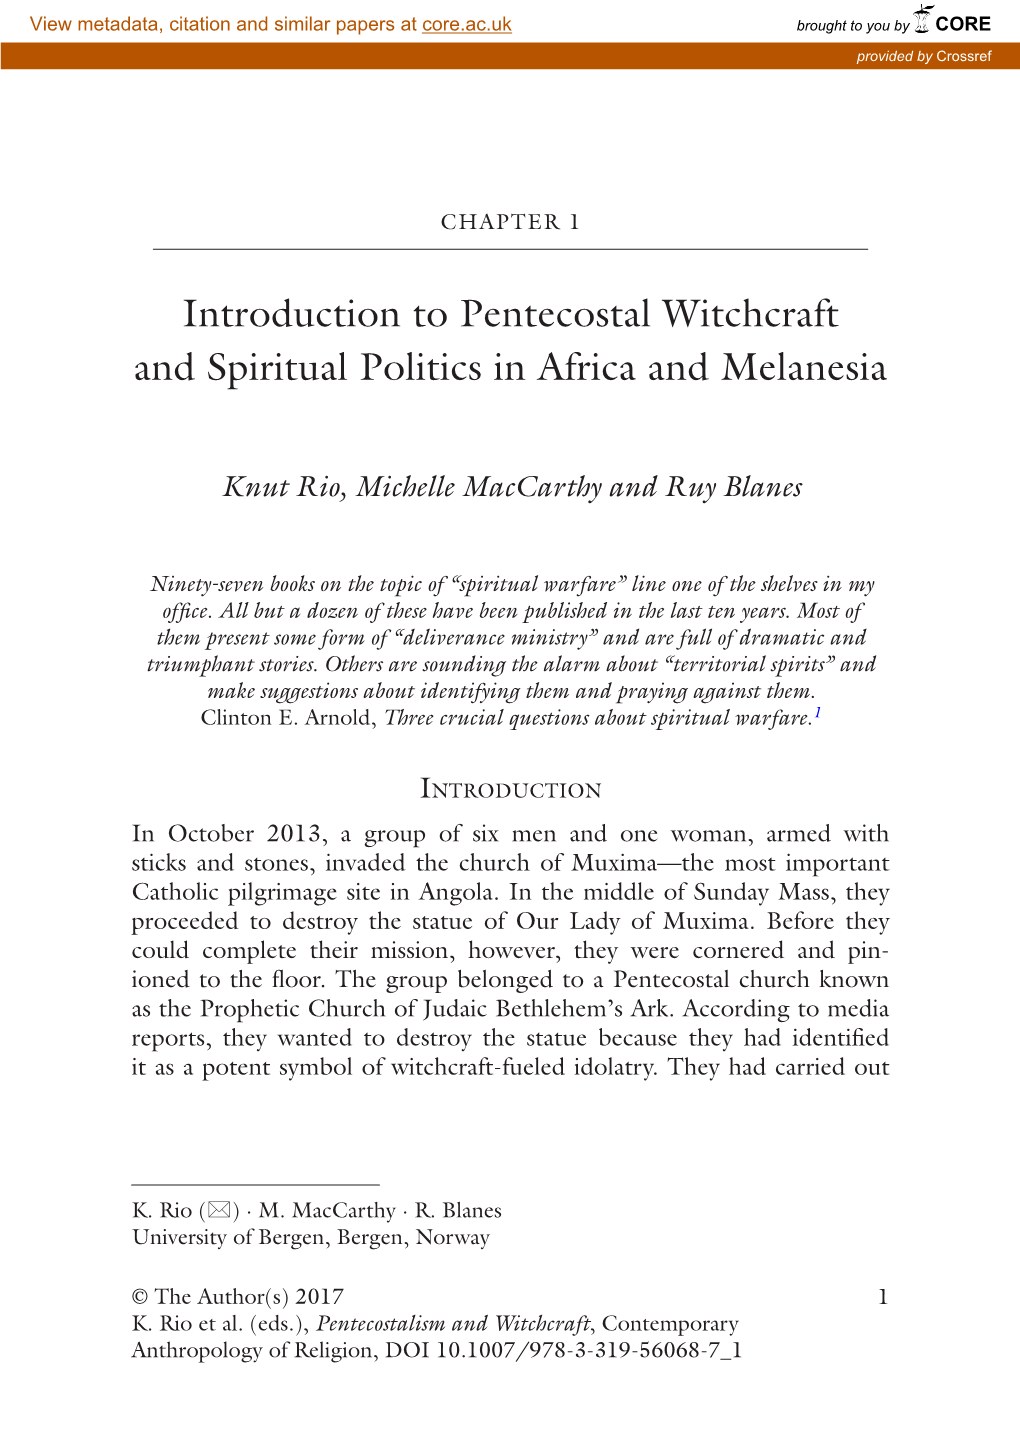 Introduction to Pentecostal Witchcraft and Spiritual Politics in Africa and Melanesia